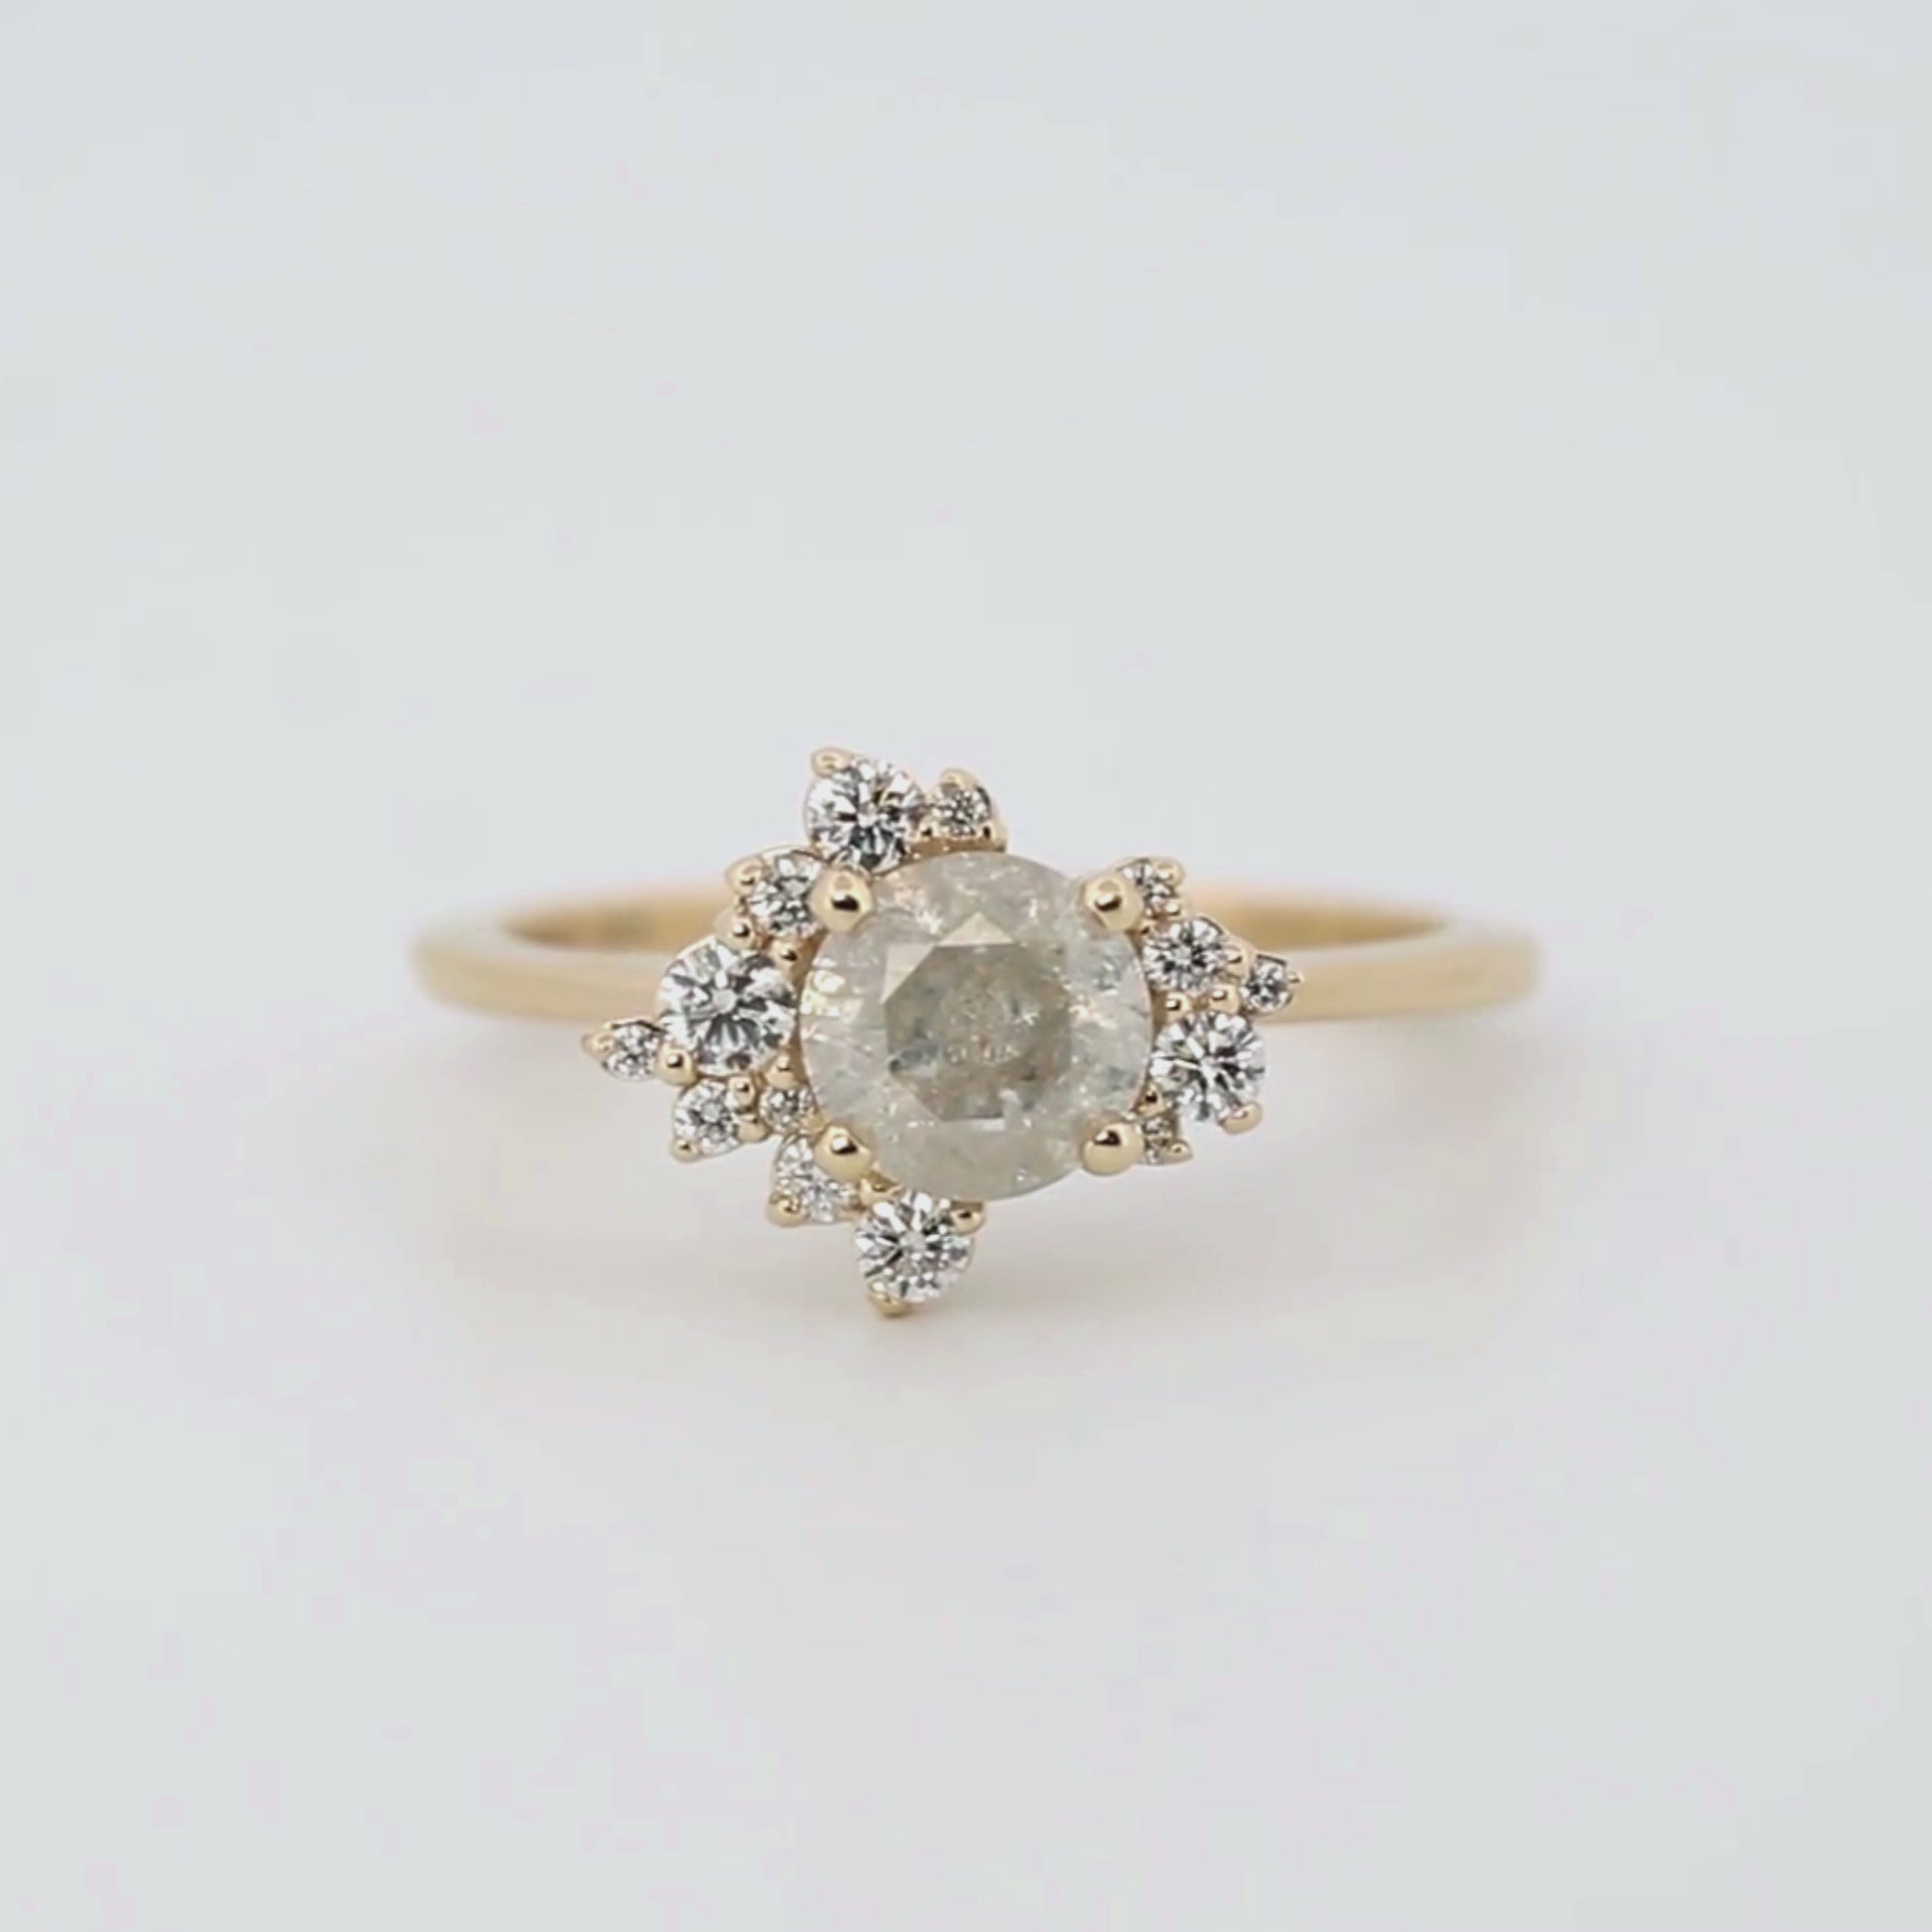 Orion Ring with a 1.04 Carat Round Light Gray Salt and Pepper Diamond and White Accent Diamonds in 14k Yellow Gold - Ready to Size and Ship